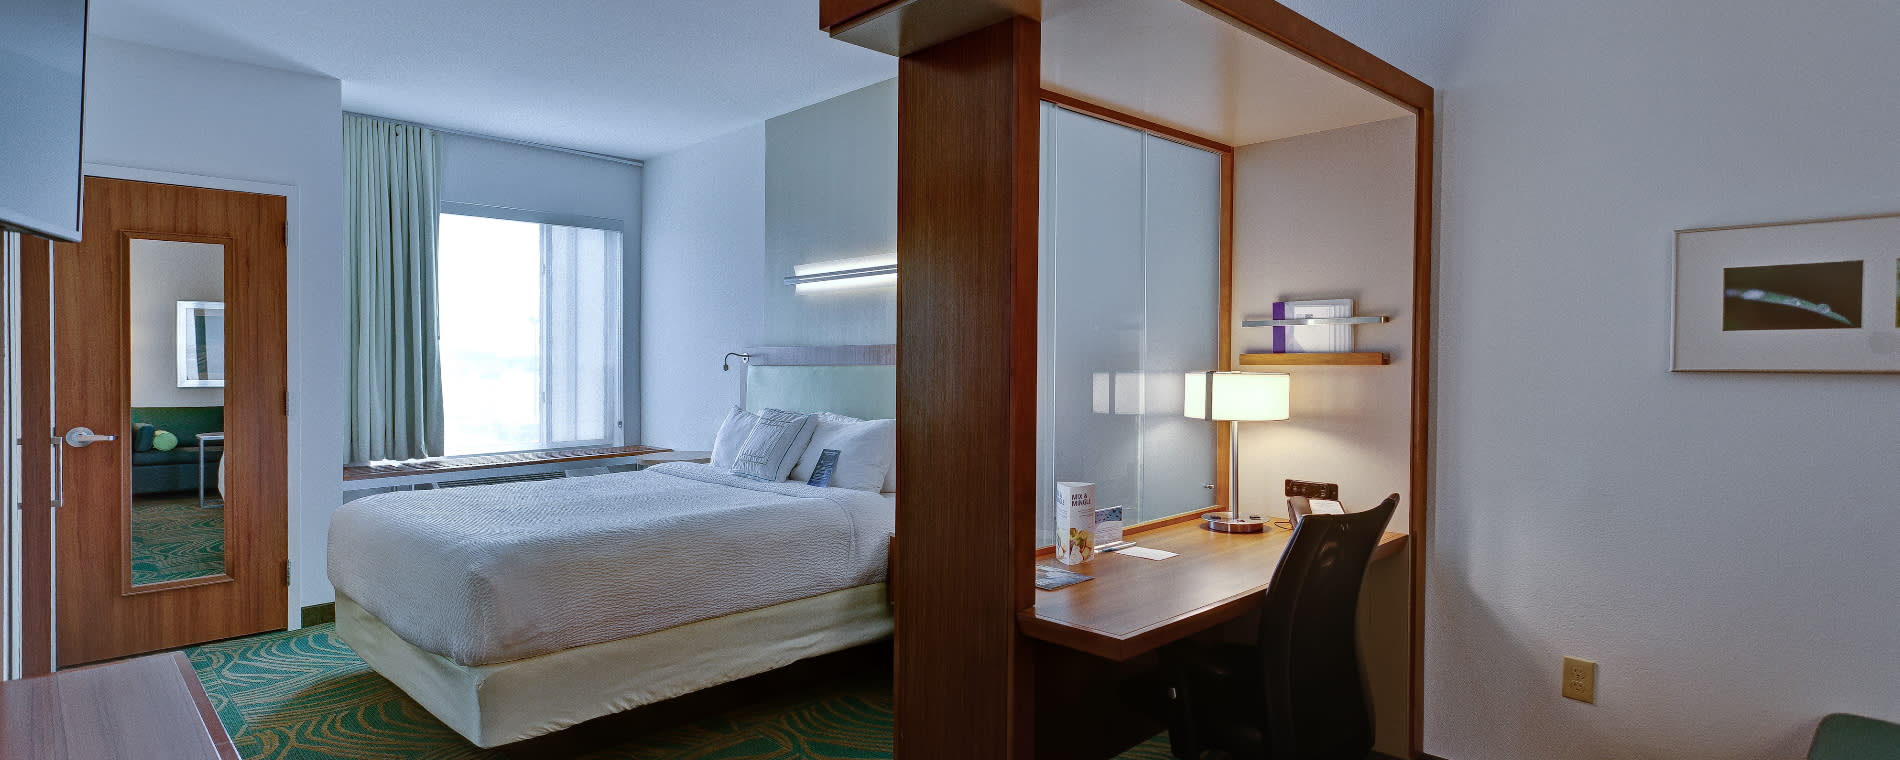 Springhill Suites by Marriott Wichita Airport Room